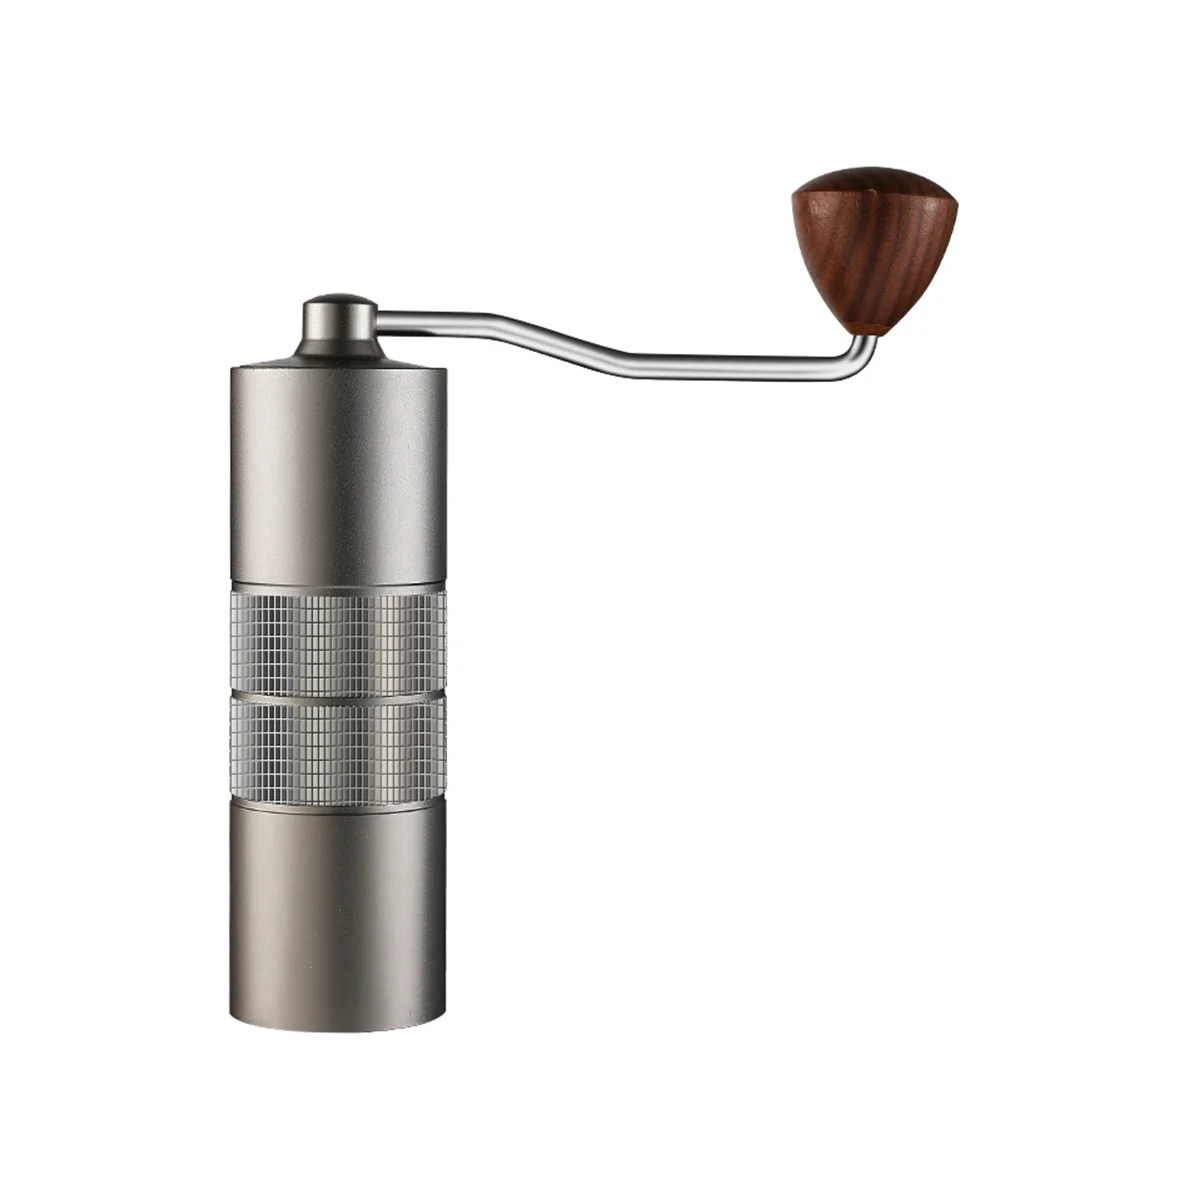 

Manual Coffee Grinder CNC Conical Burr Mill with Adjustable Setting Coffee Grinder for Drip Coffee Espresso French Press